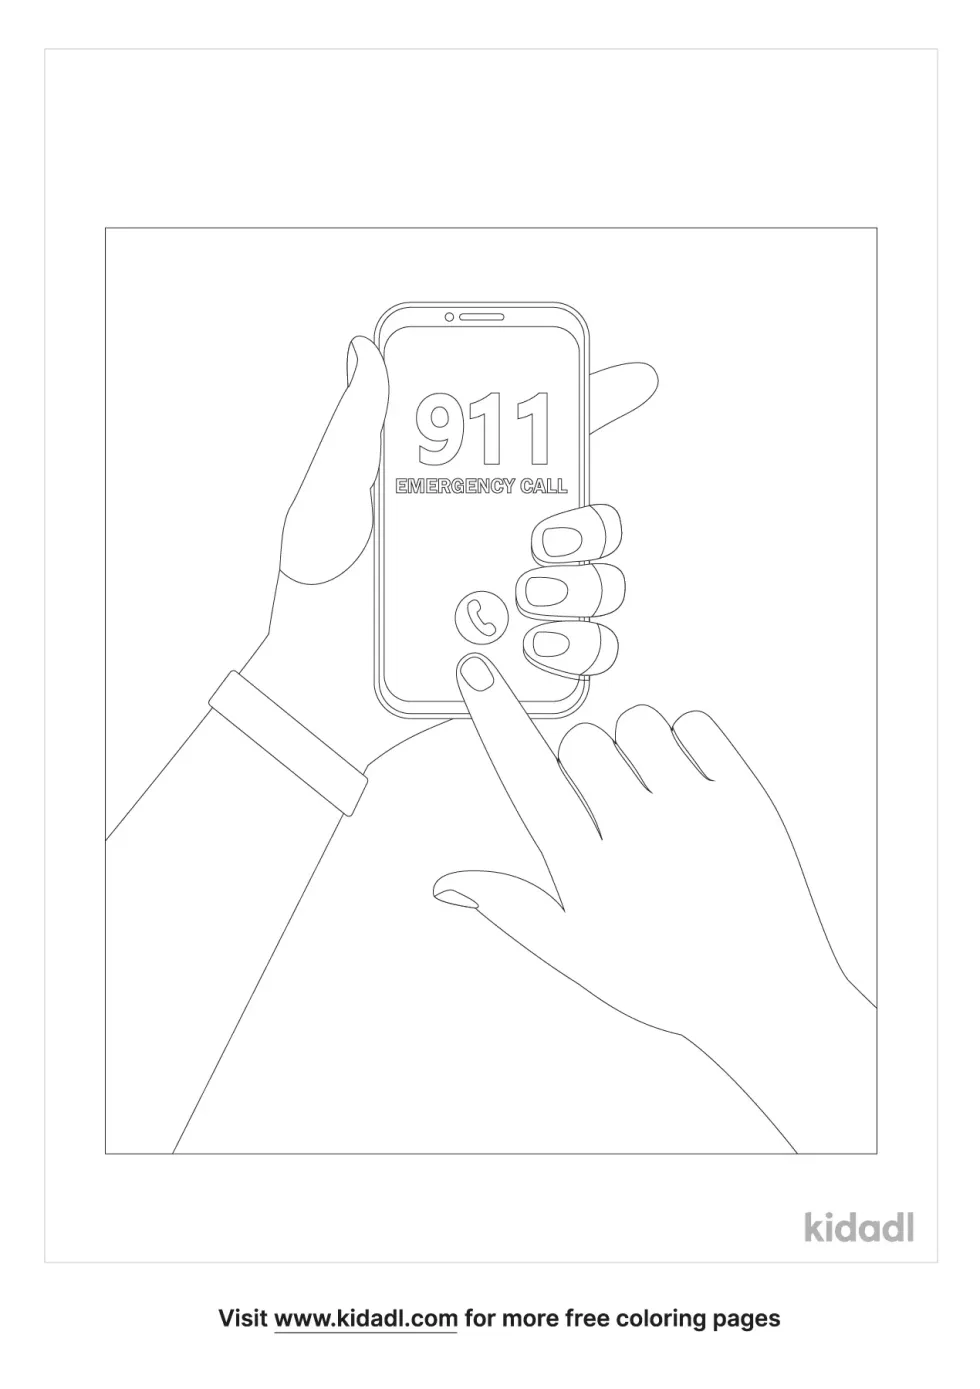 A coloring page showing a pair of hands dialing 911 from a mobile phone